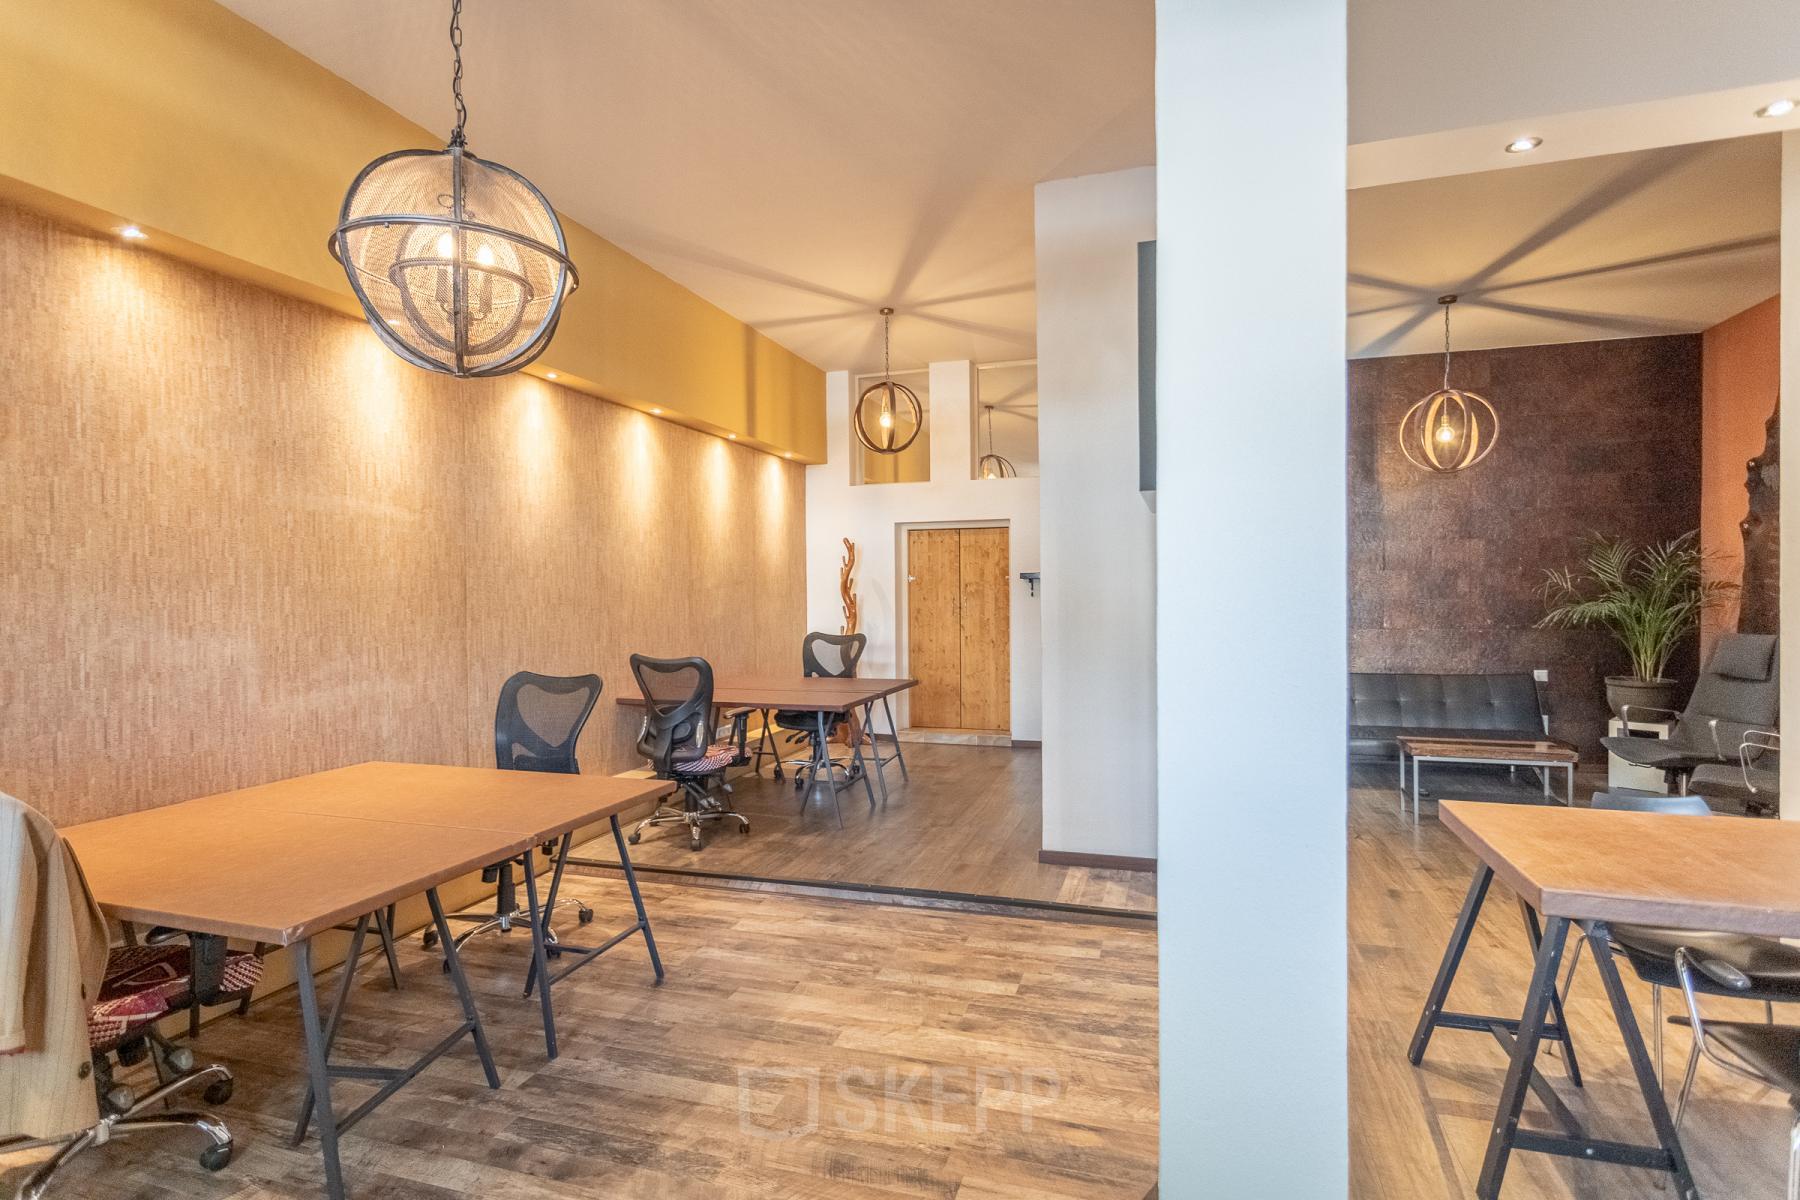 Contemporary office space rental at Oudeschans 21, Amsterdam Center, with stylish furnishings and ambient lighting.